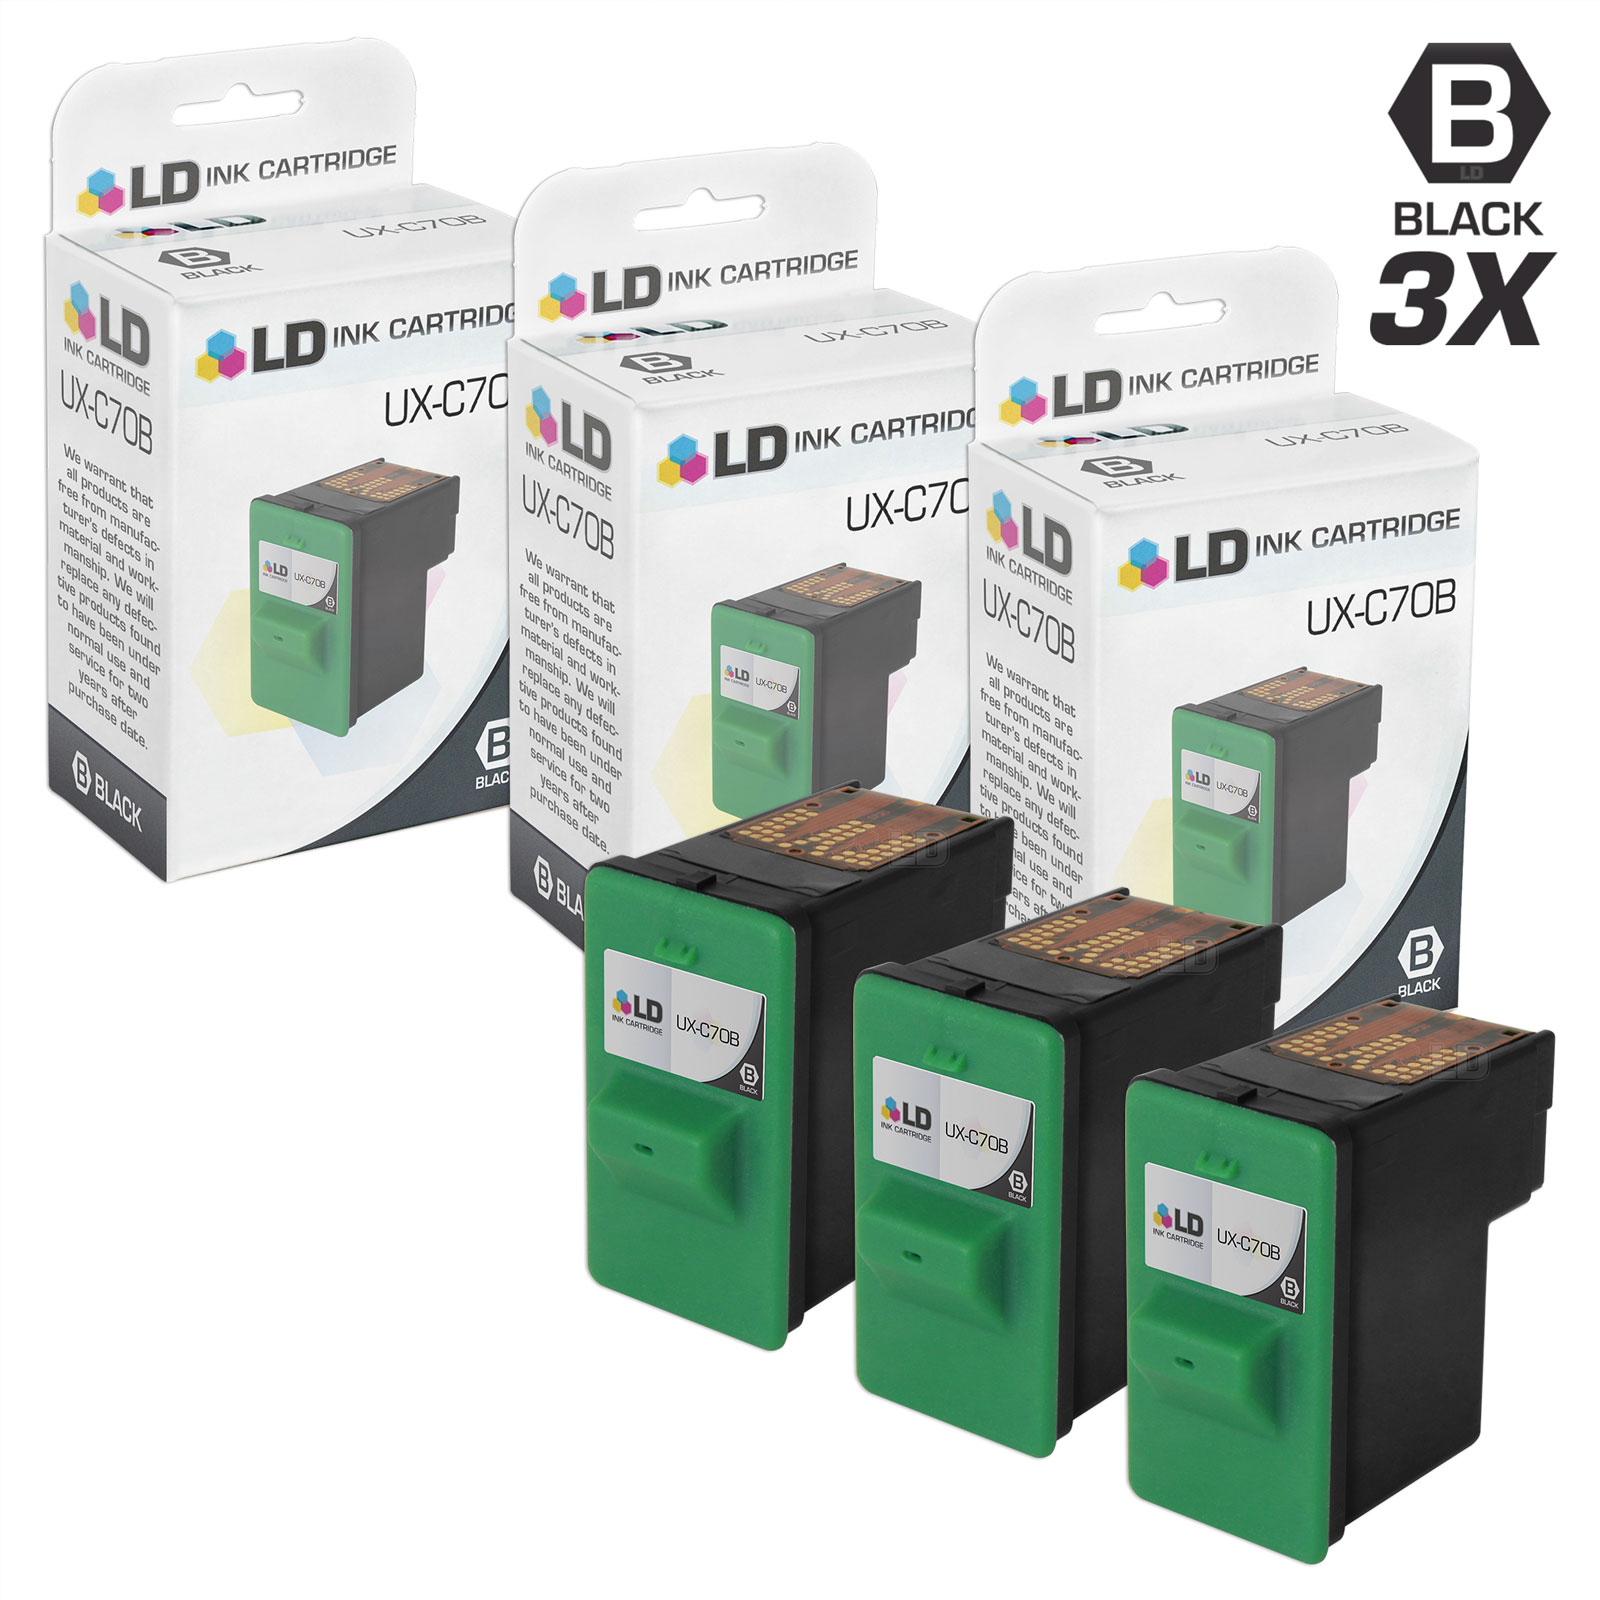 Remanufactured Cartridge Replacement for Sharp UX-C70B (Black, 3-Pack) - image 1 of 1